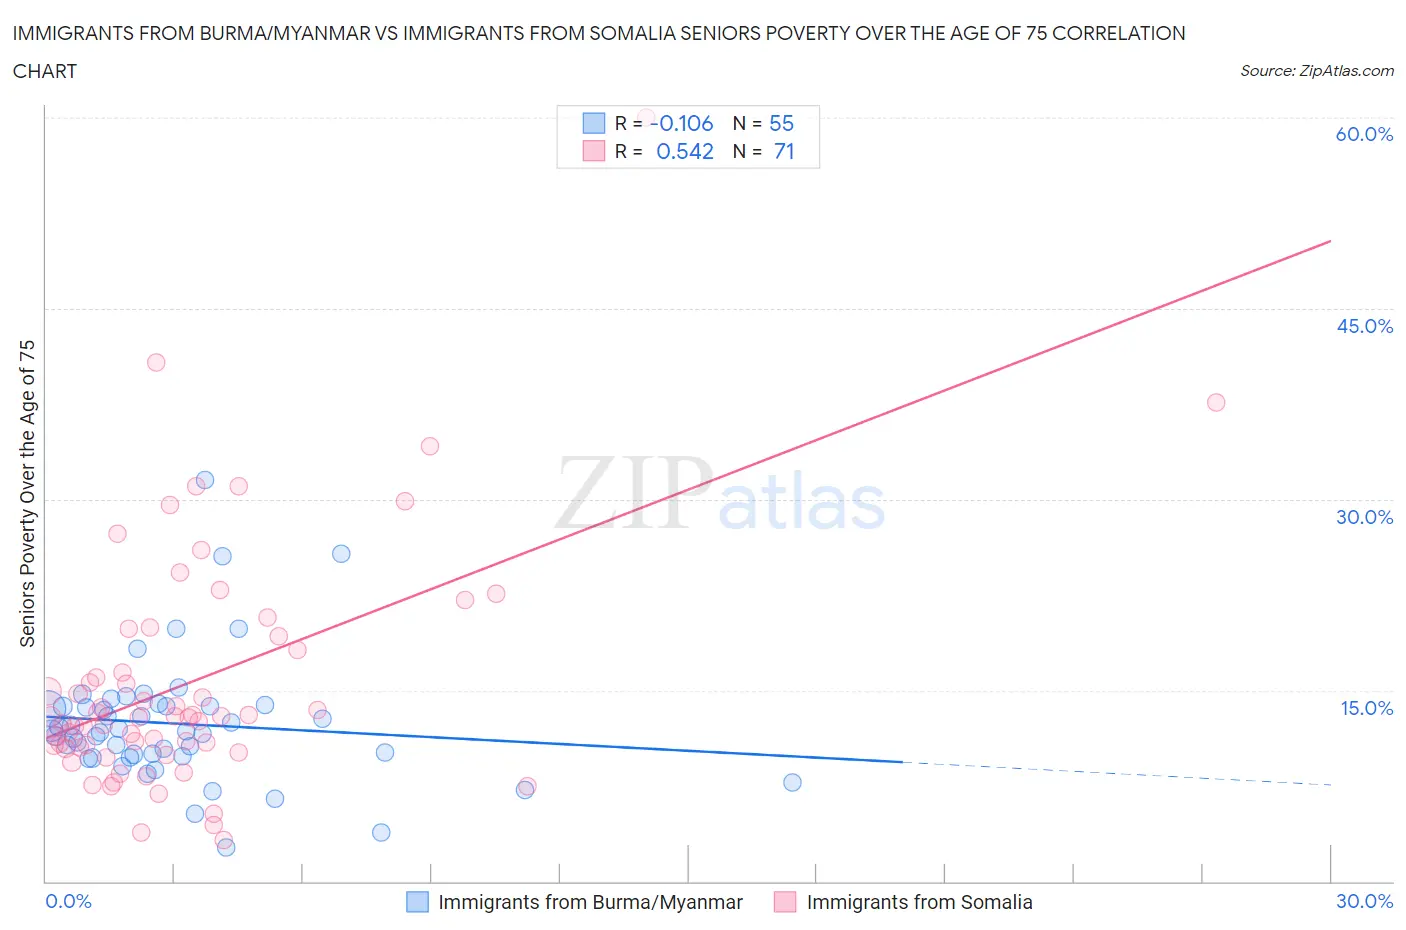 Immigrants from Burma/Myanmar vs Immigrants from Somalia Seniors Poverty Over the Age of 75